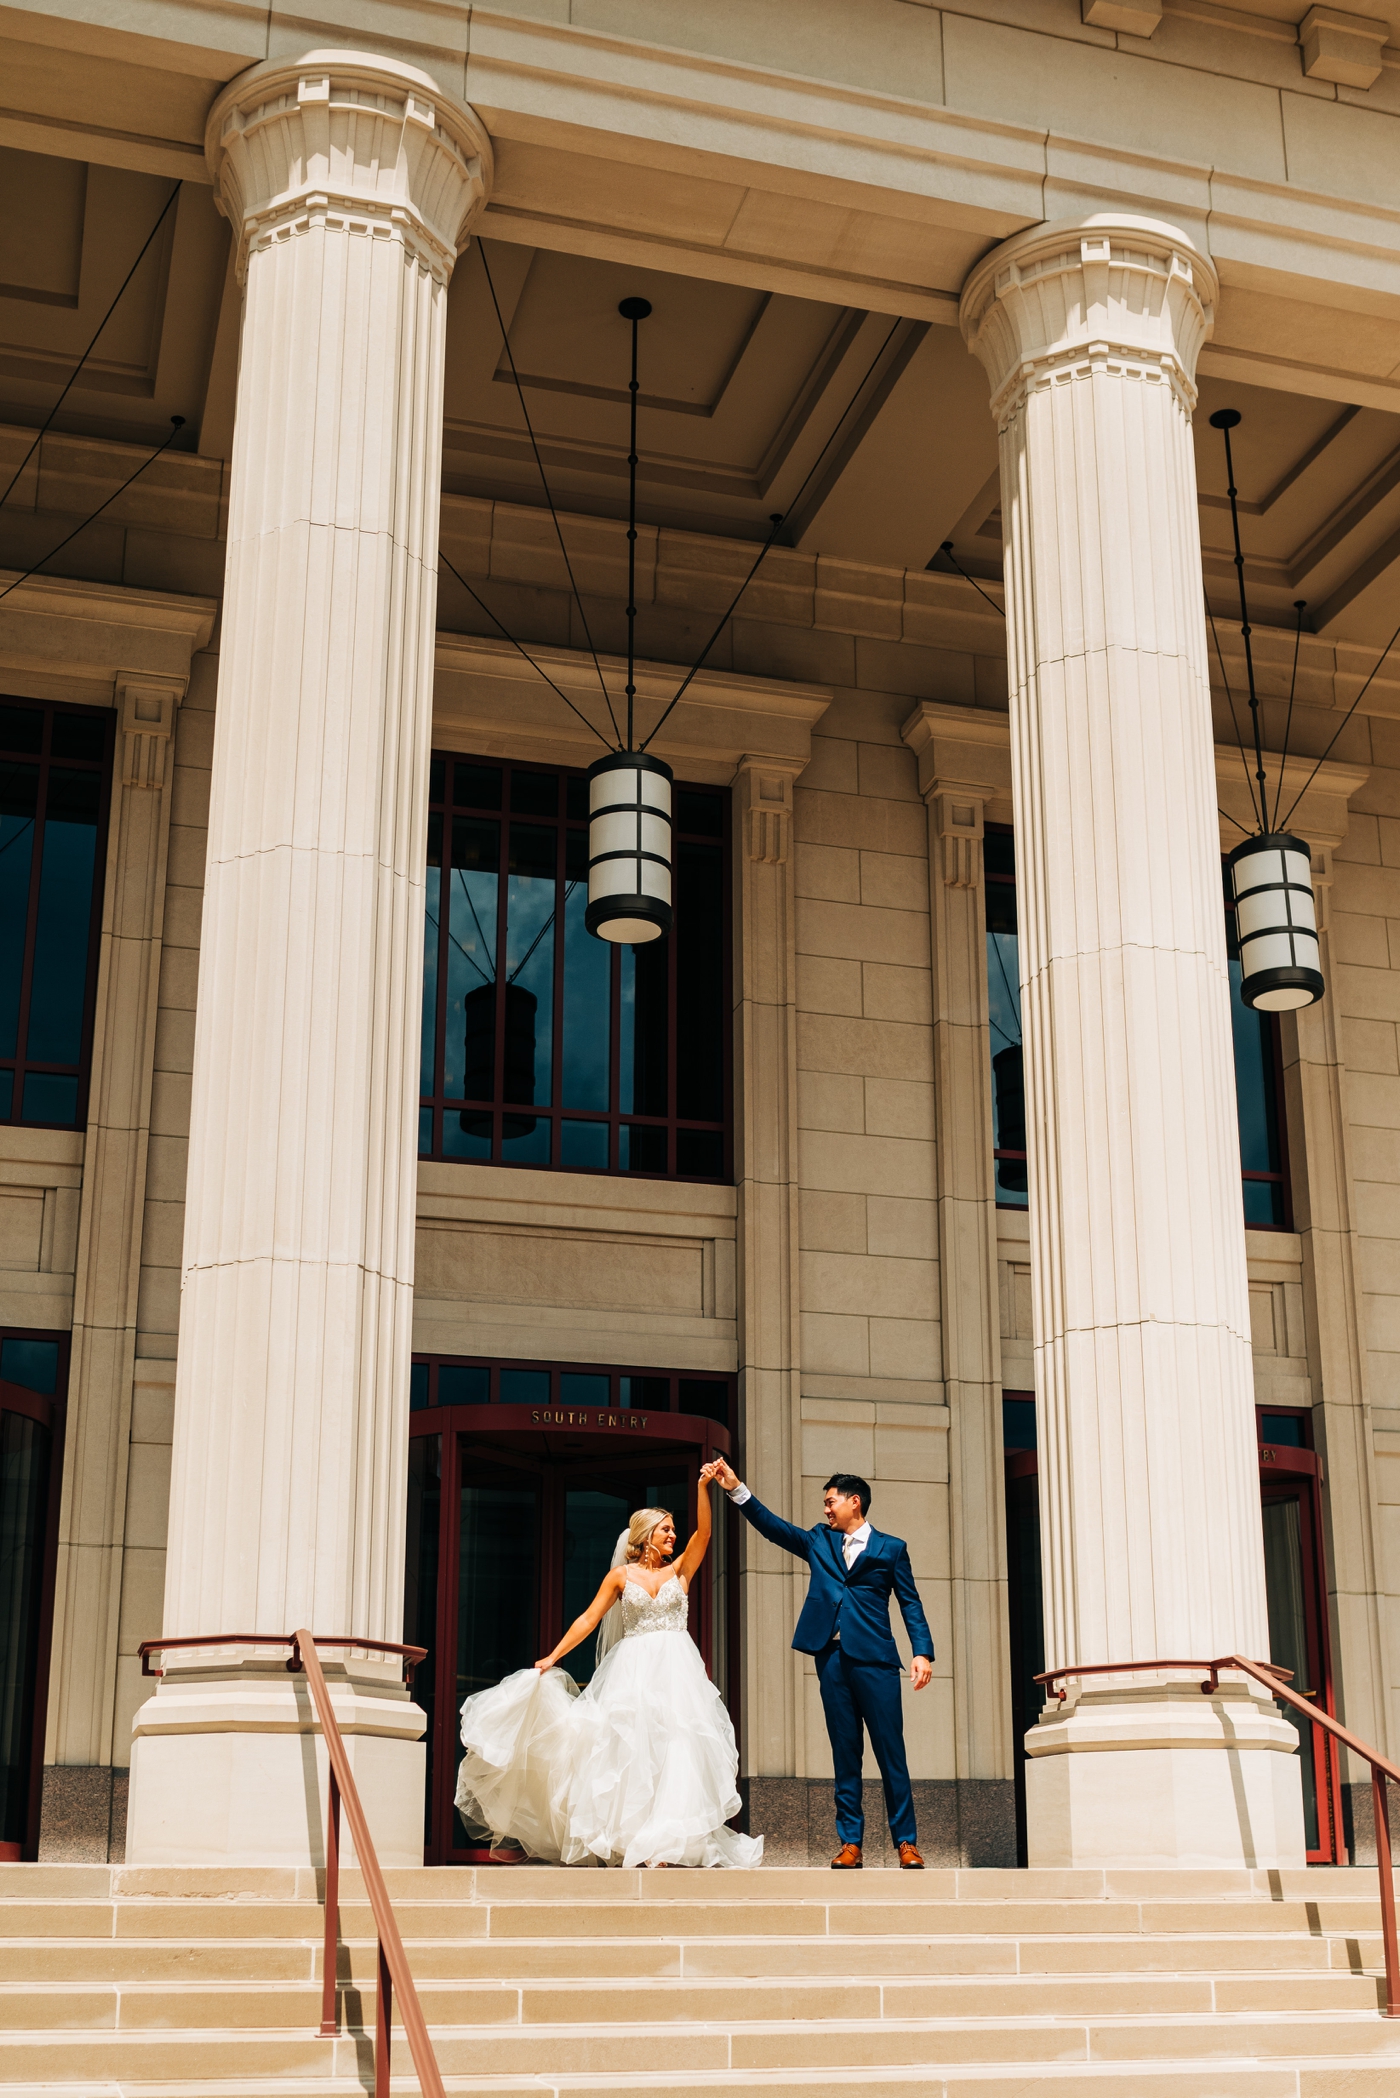 Bride and groom wedding portraits by Mika LH Photography